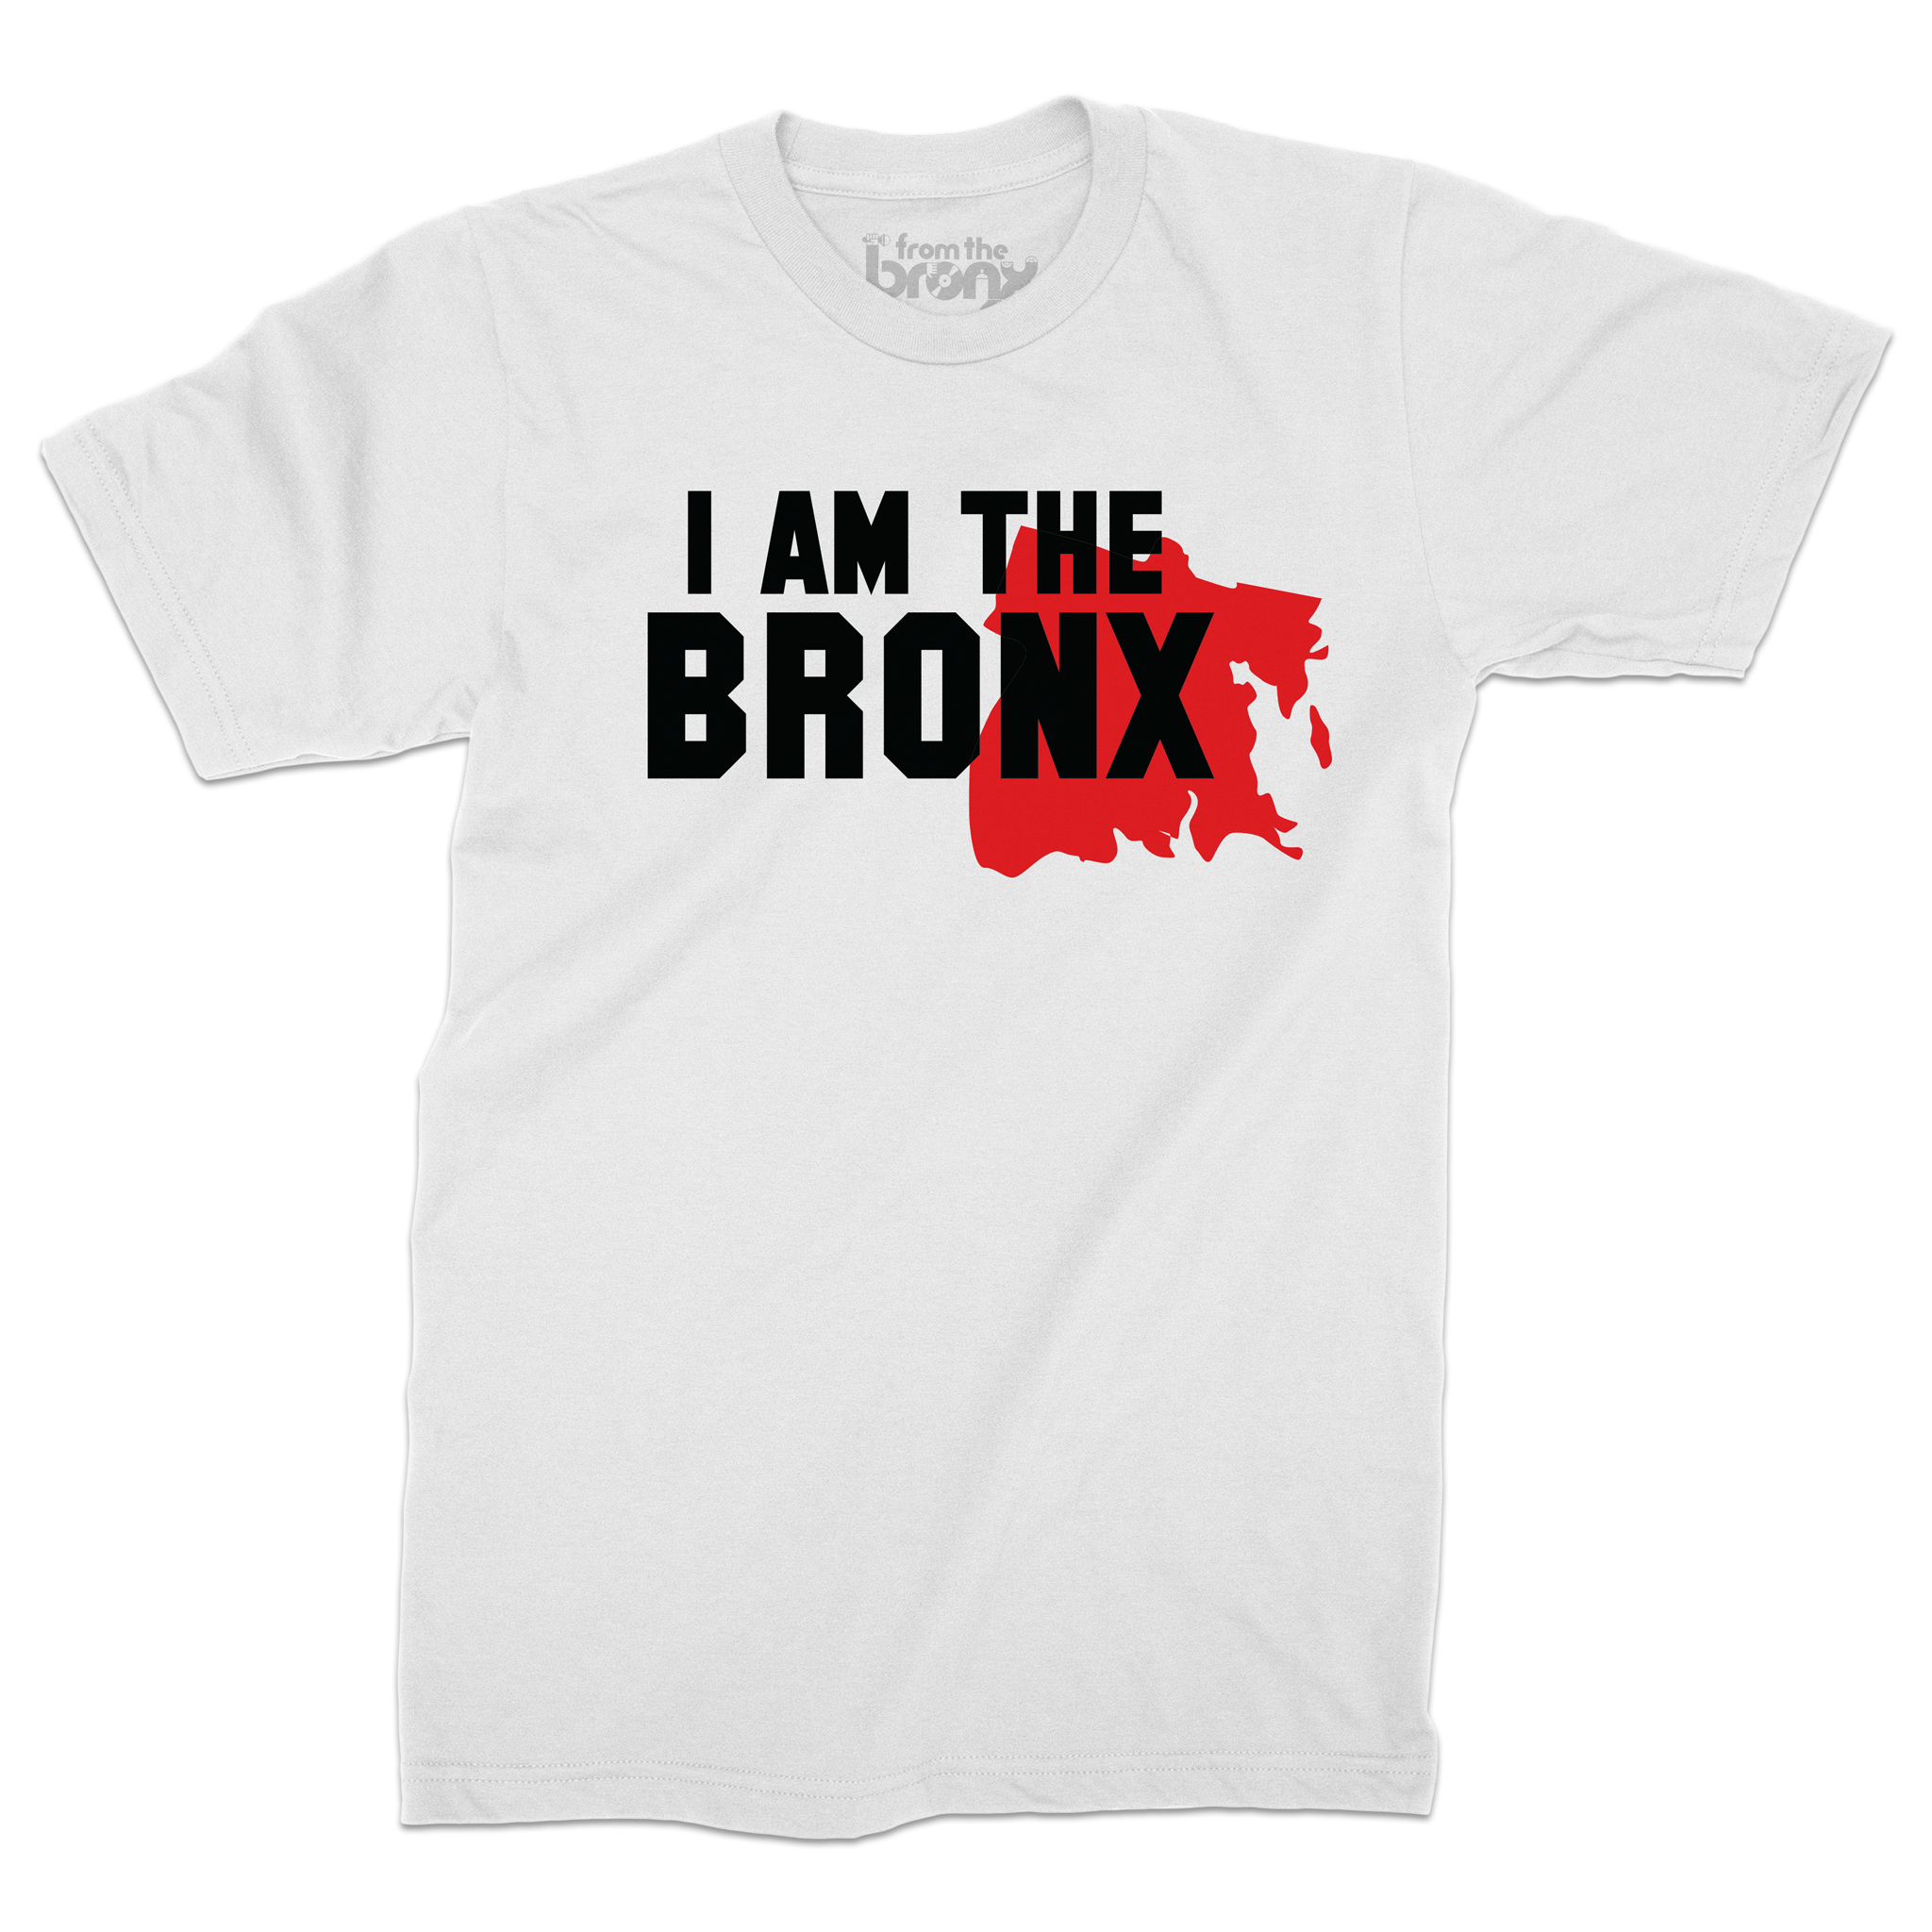 I AM THE BRONX T-Shirt Front in White